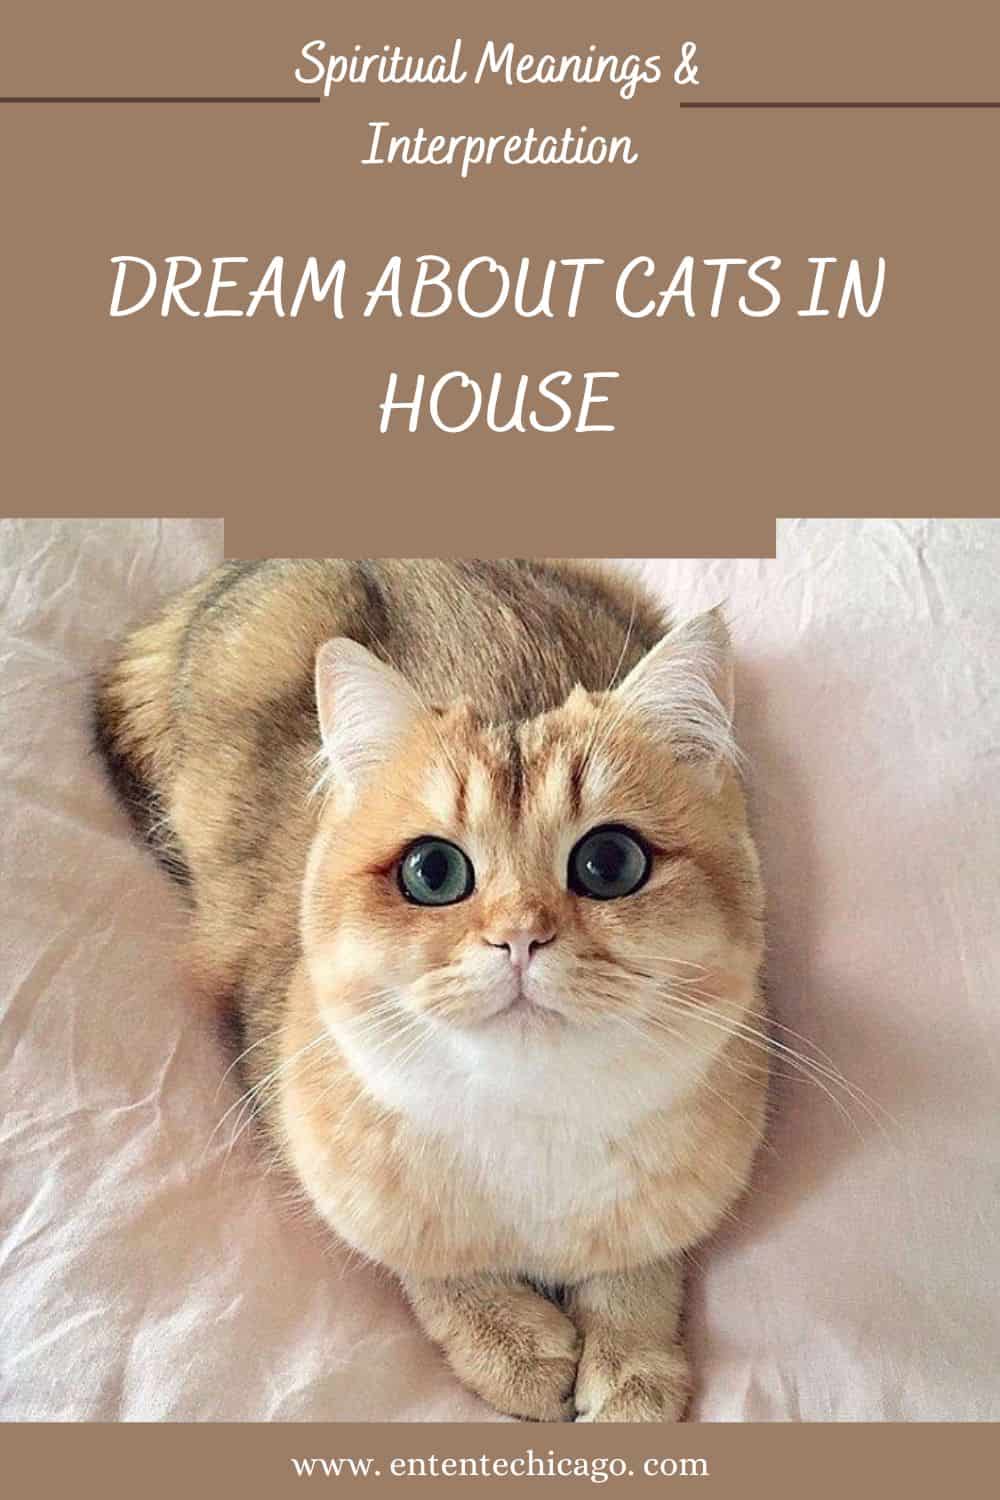 What Does it Mean to Dream about Cats in House?